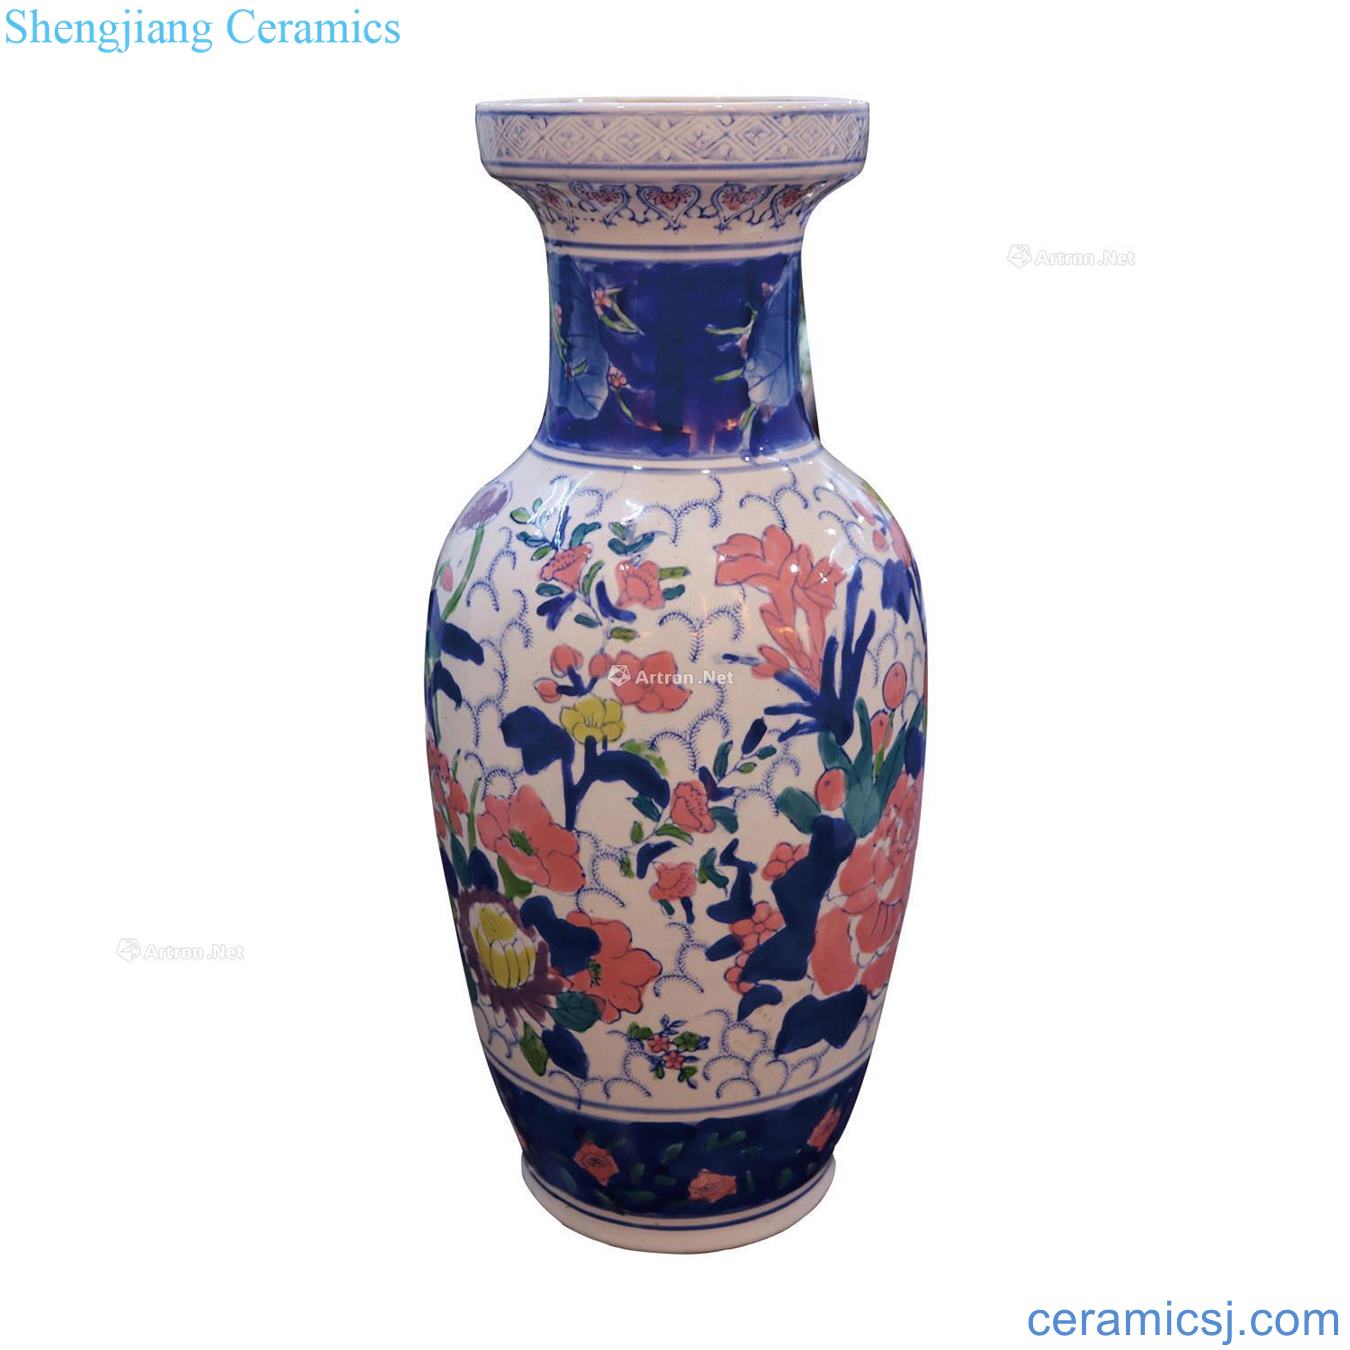 Pastel flower pattern design in the qing dynasty